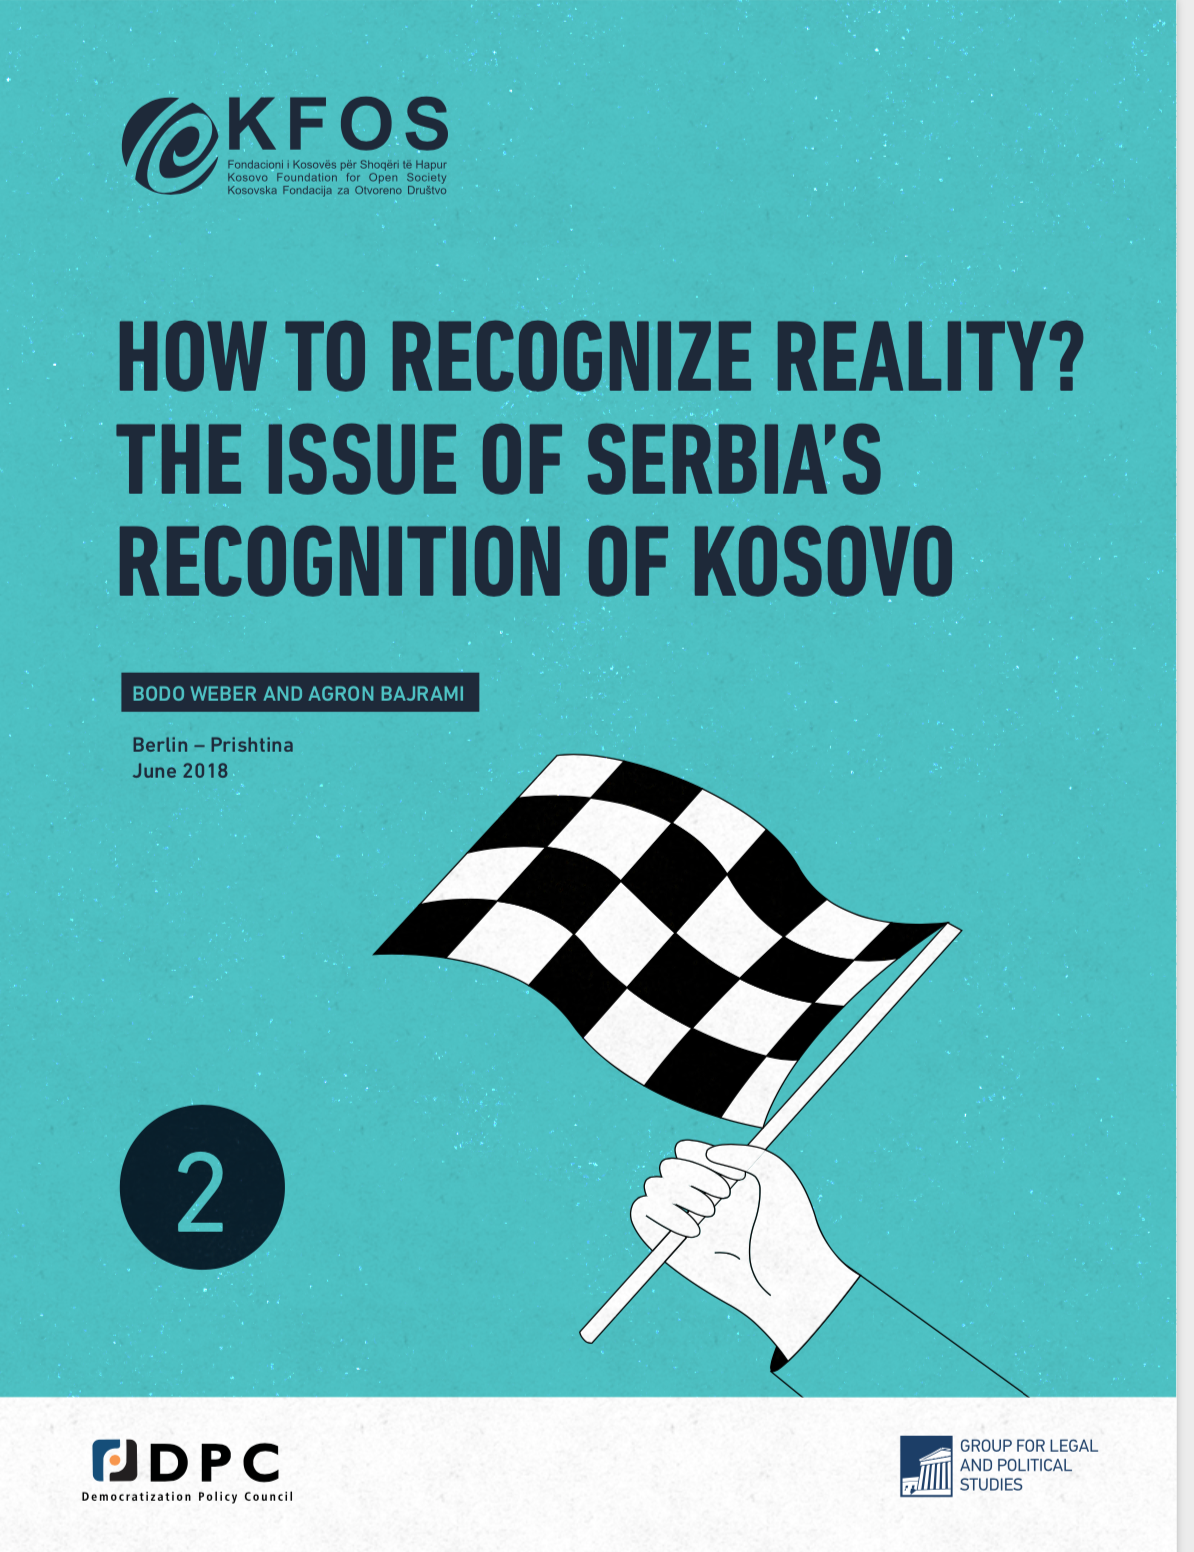 How to recognize reality?: The issue of Serbia's recognition of Kosovo